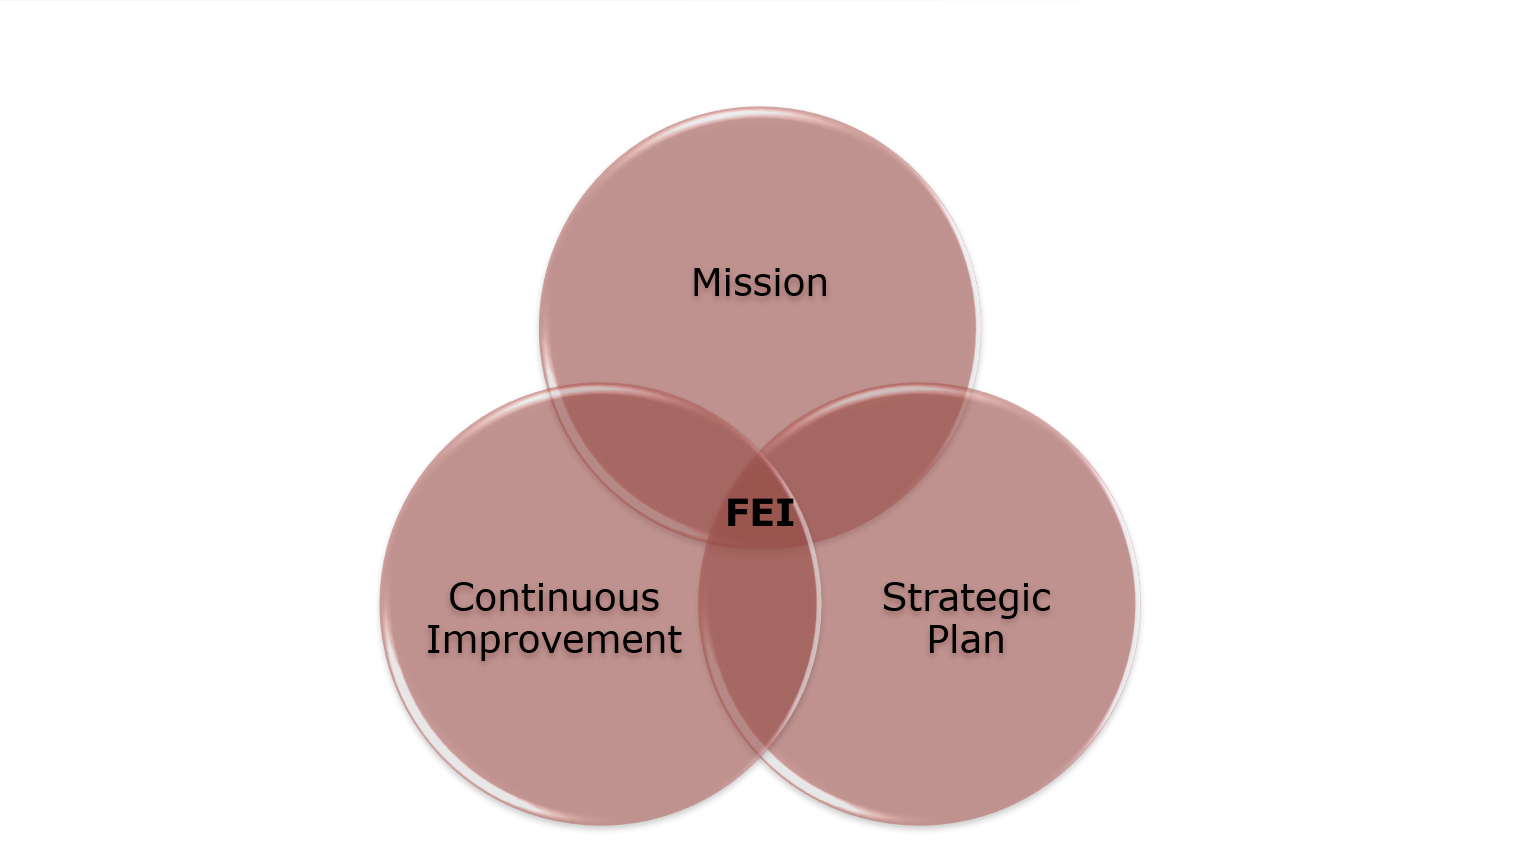 Venn diagram with three cirlces. The top circle is labeled "Mission". The bottom left circle is labeled "continuous improvement". The bottom right circle is labeled "strategic plan." Where the three circles converge is labeled "FEI".